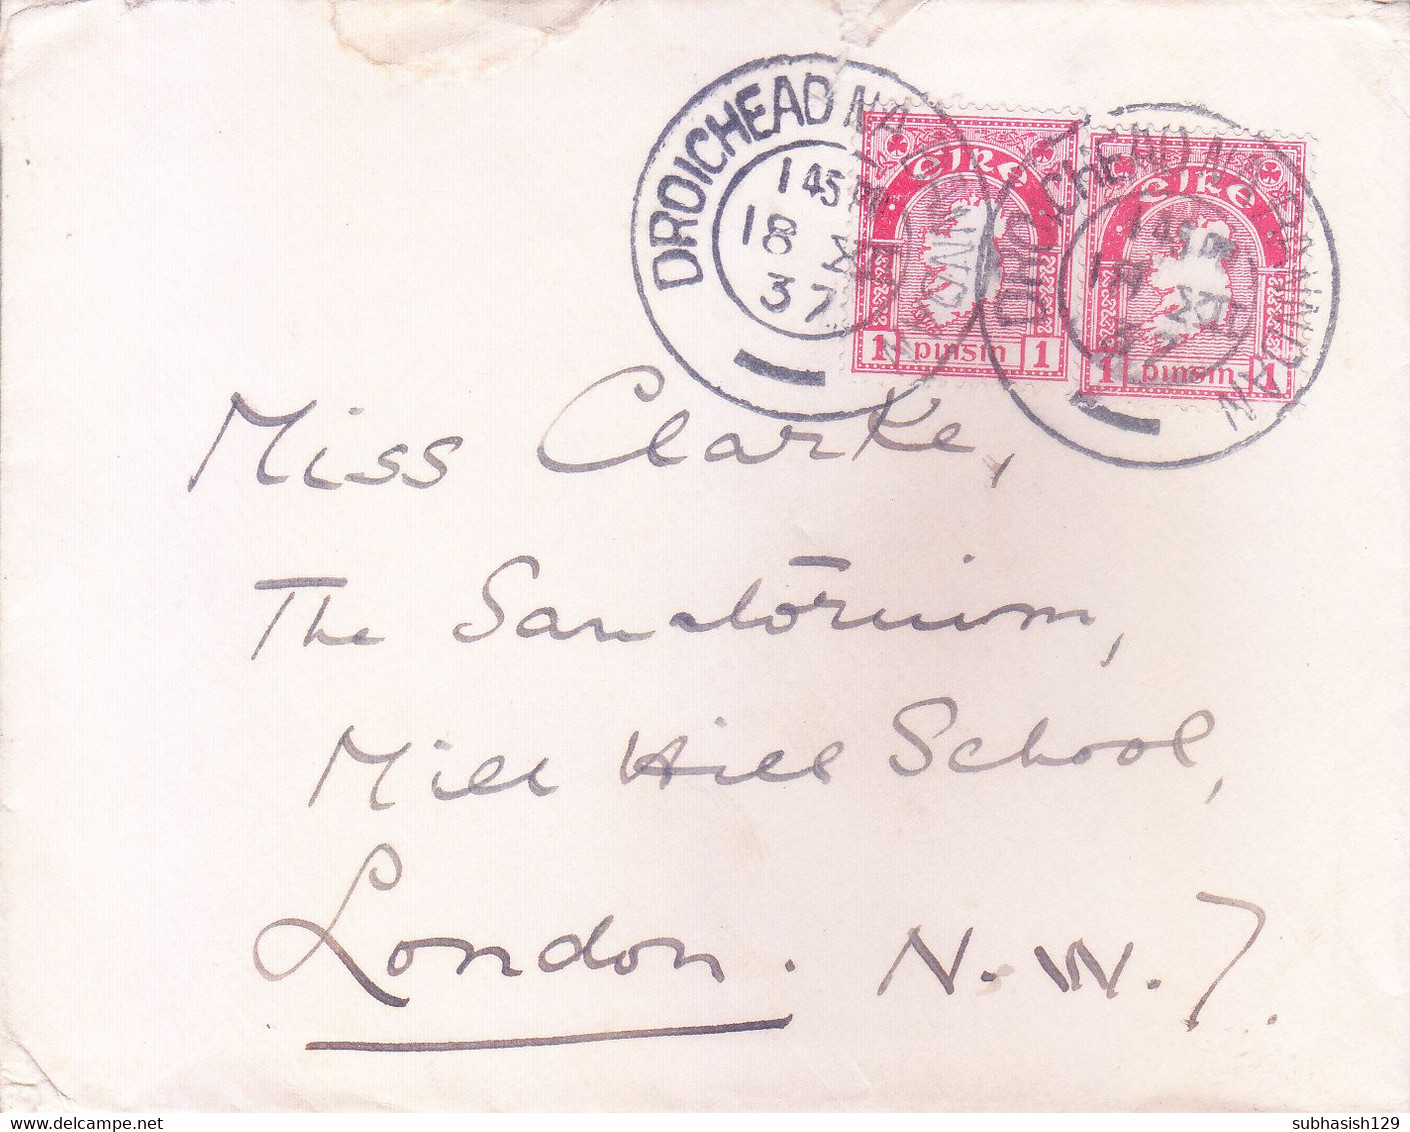 IRELAND : ENTIRE : YEAR 1937 : COVER POSTED FROM DROICHEAD NA RANNDAN FOR LONDON : USE OF 2v 1 PINSIN STAMPS - Briefe U. Dokumente